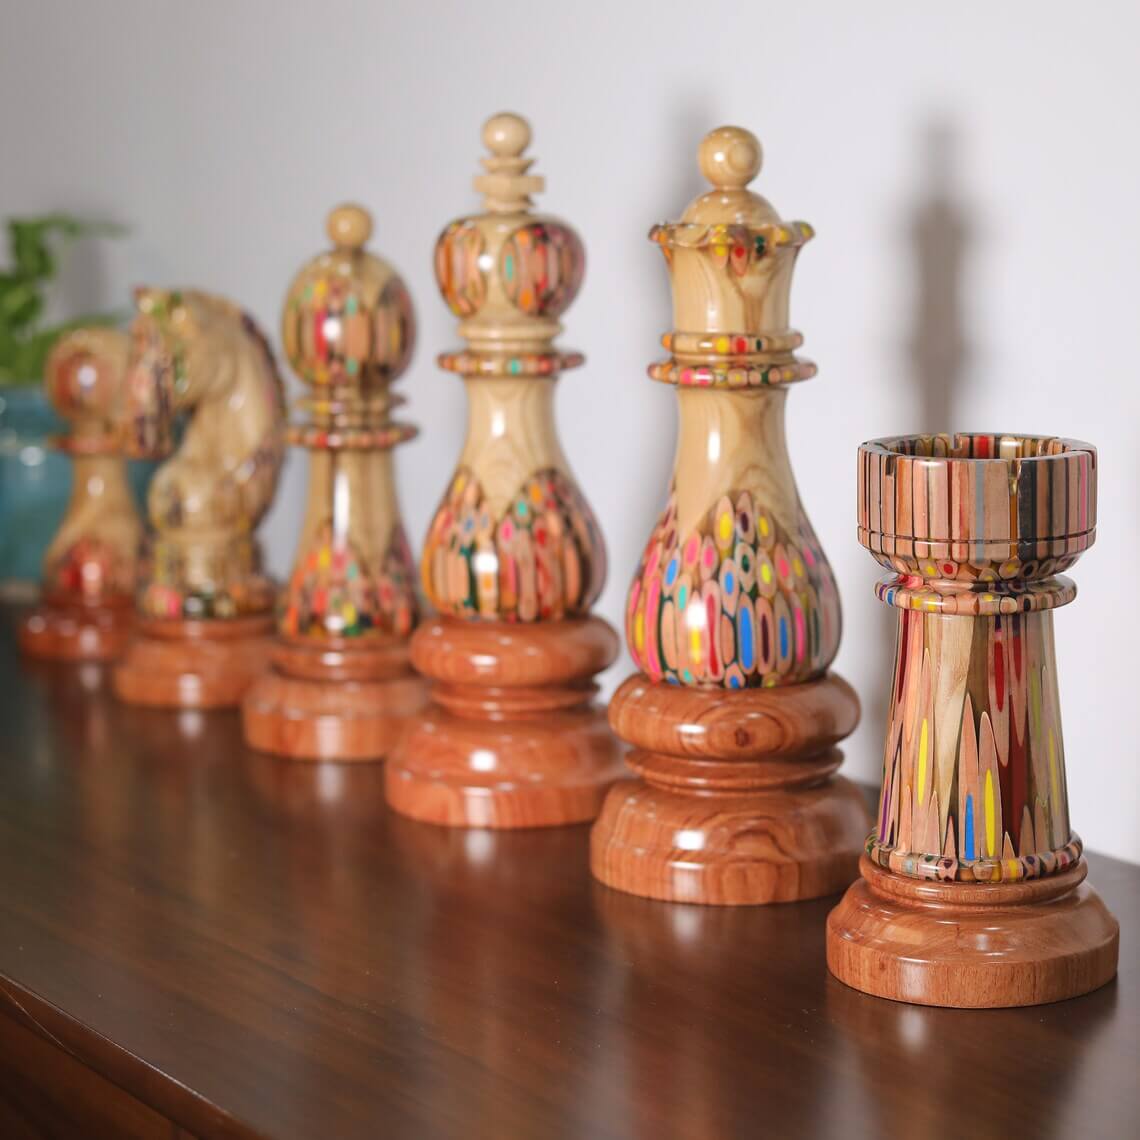 6 Giant Chess Pieces King - Queen - Bishop - Rook - Knight - Pawn Super Deluxe Chess (1)